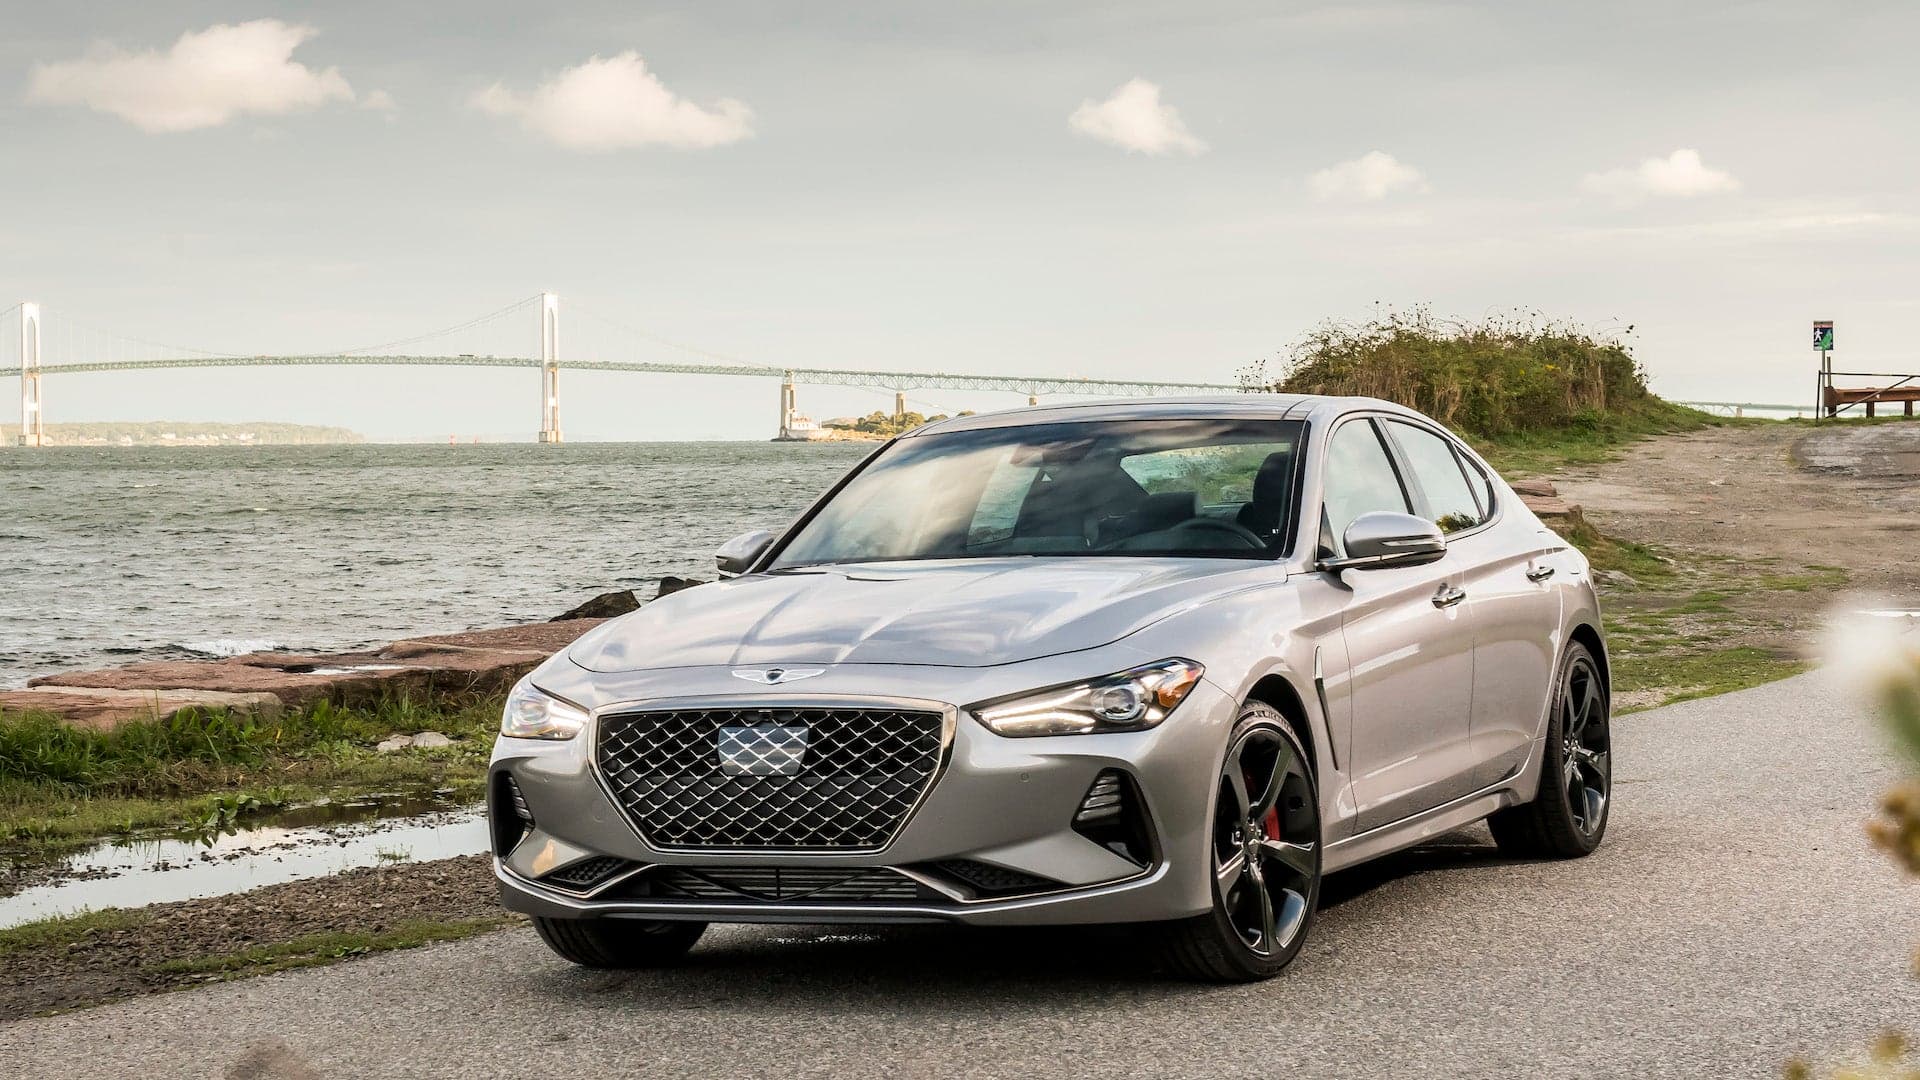 2021 Genesis G70 Keeps the Manual Dream Alive for Yet Another Year